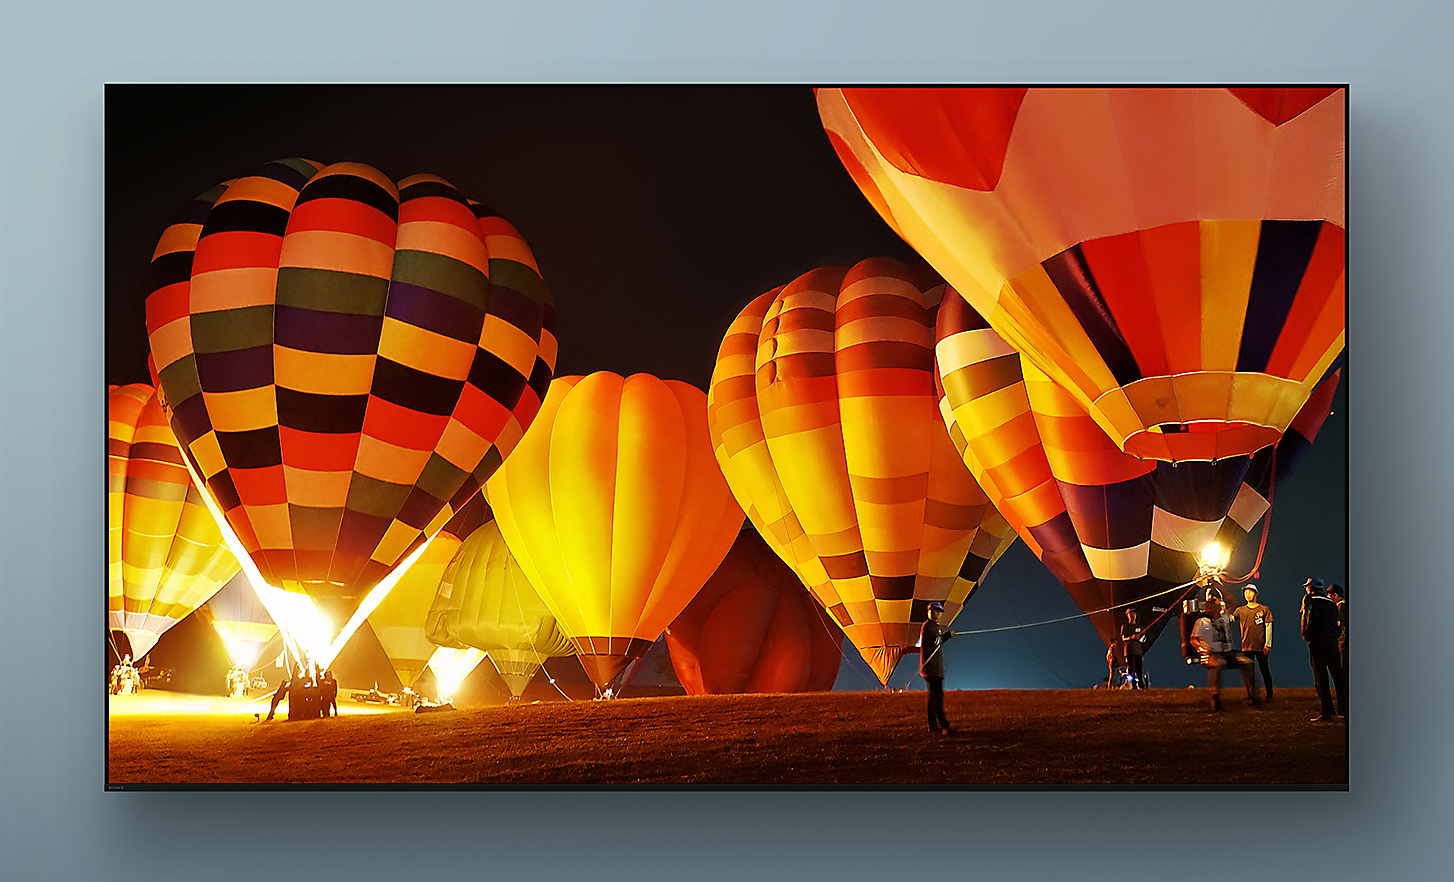 BRAVIA TV with screenshot of multicoloured hot air balloons taking off at night